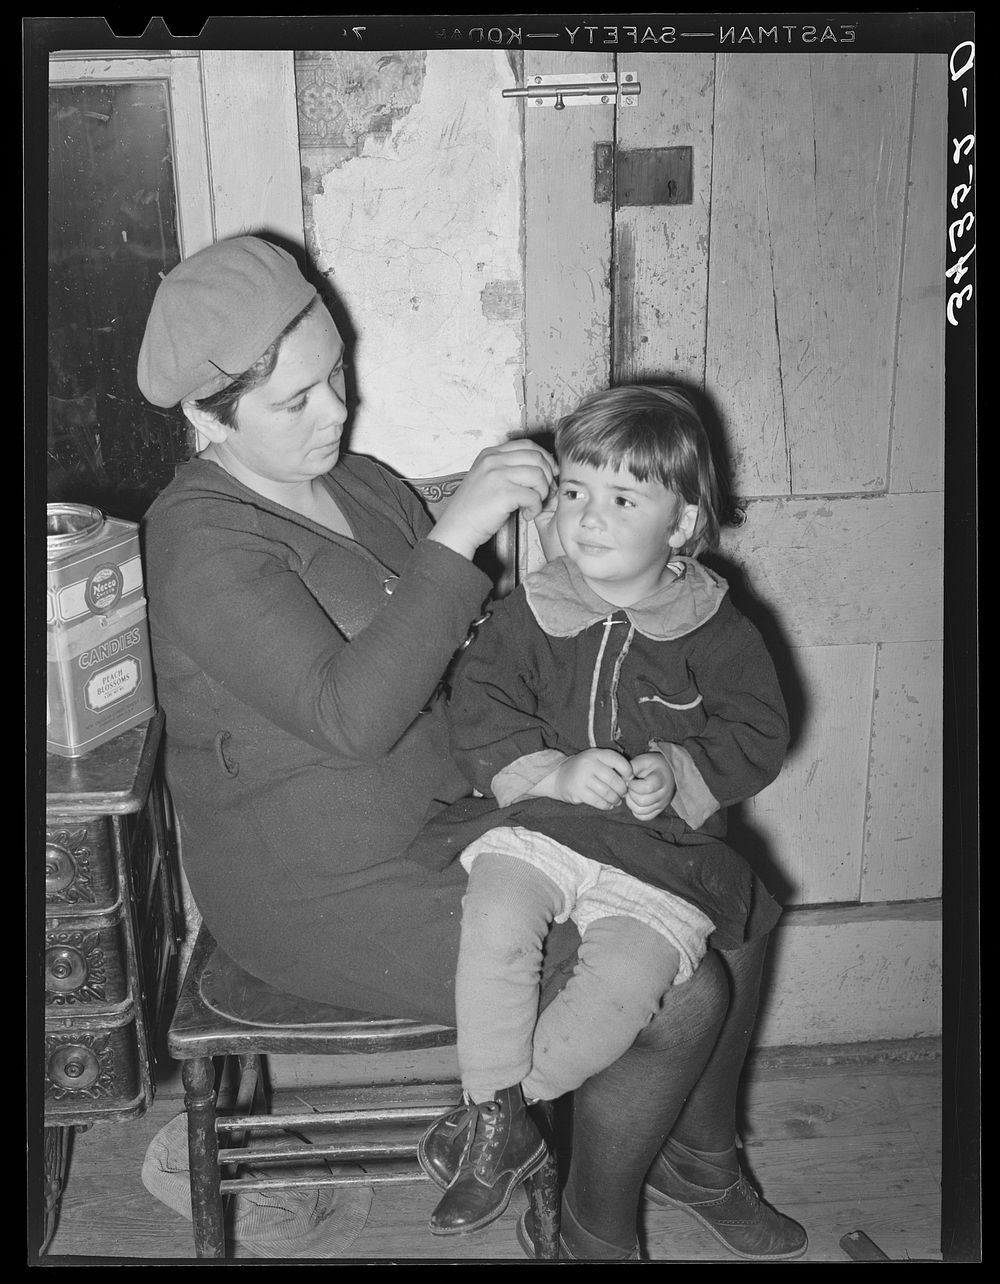 Wife of FSA (Farm Security Administration) client fixing her daughter's hair. Farm near Bradford, Vermont, Orange County by…